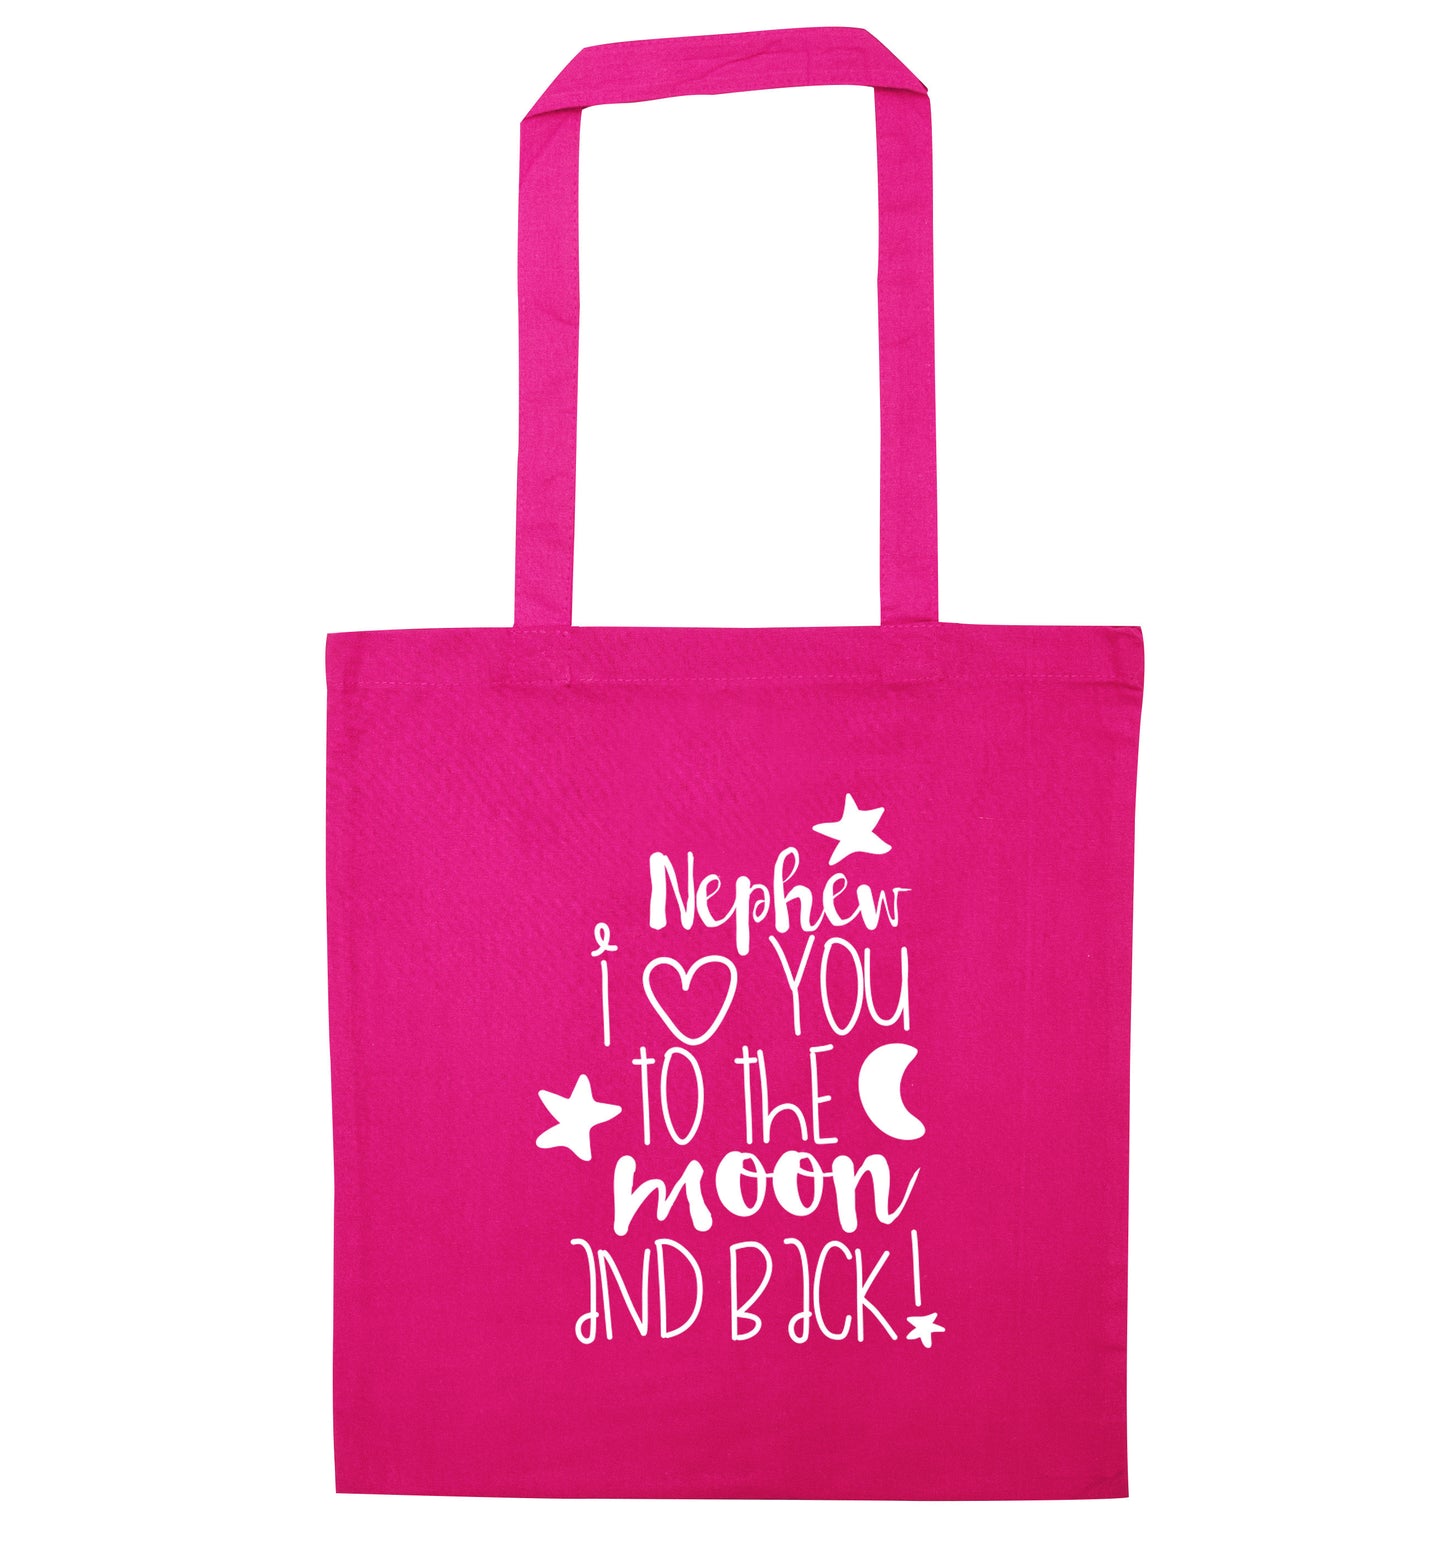 Nephew I love you to the moon and back pink tote bag